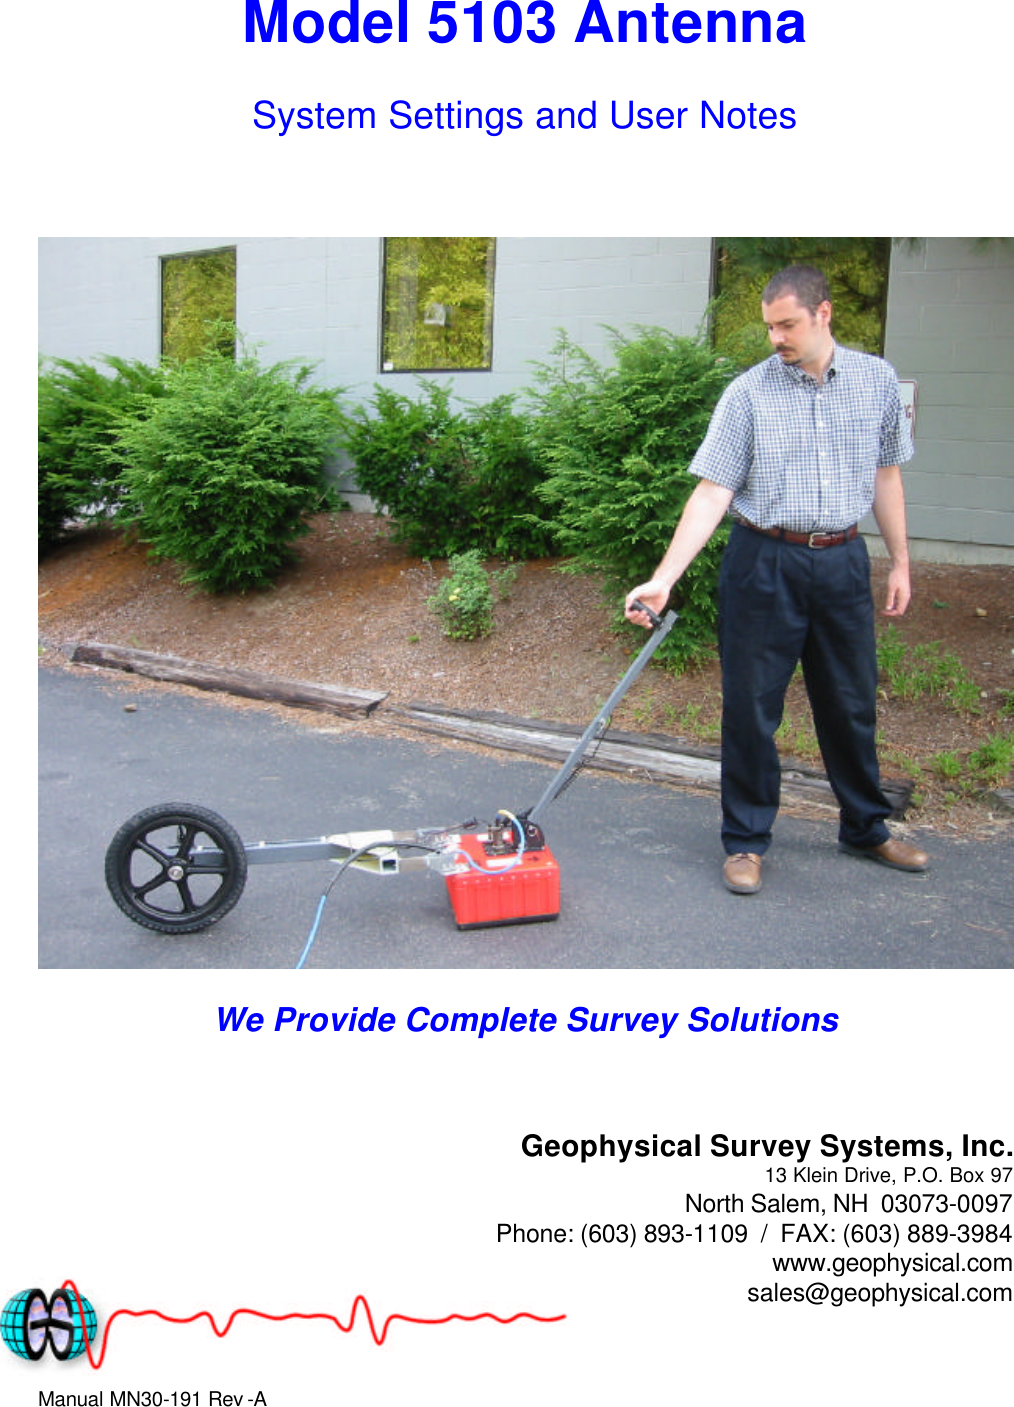 Manual MN30-191 Rev  -A Model 5103 Antenna System Settings and User Notes     We Provide Complete Survey Solutions    Geophysical Survey Systems, Inc. 13 Klein Drive, P.O. Box 97 North Salem, NH  03073-0097 Phone: (603) 893-1109  /  FAX: (603) 889-3984 www.geophysical.com sales@geophysical.com 